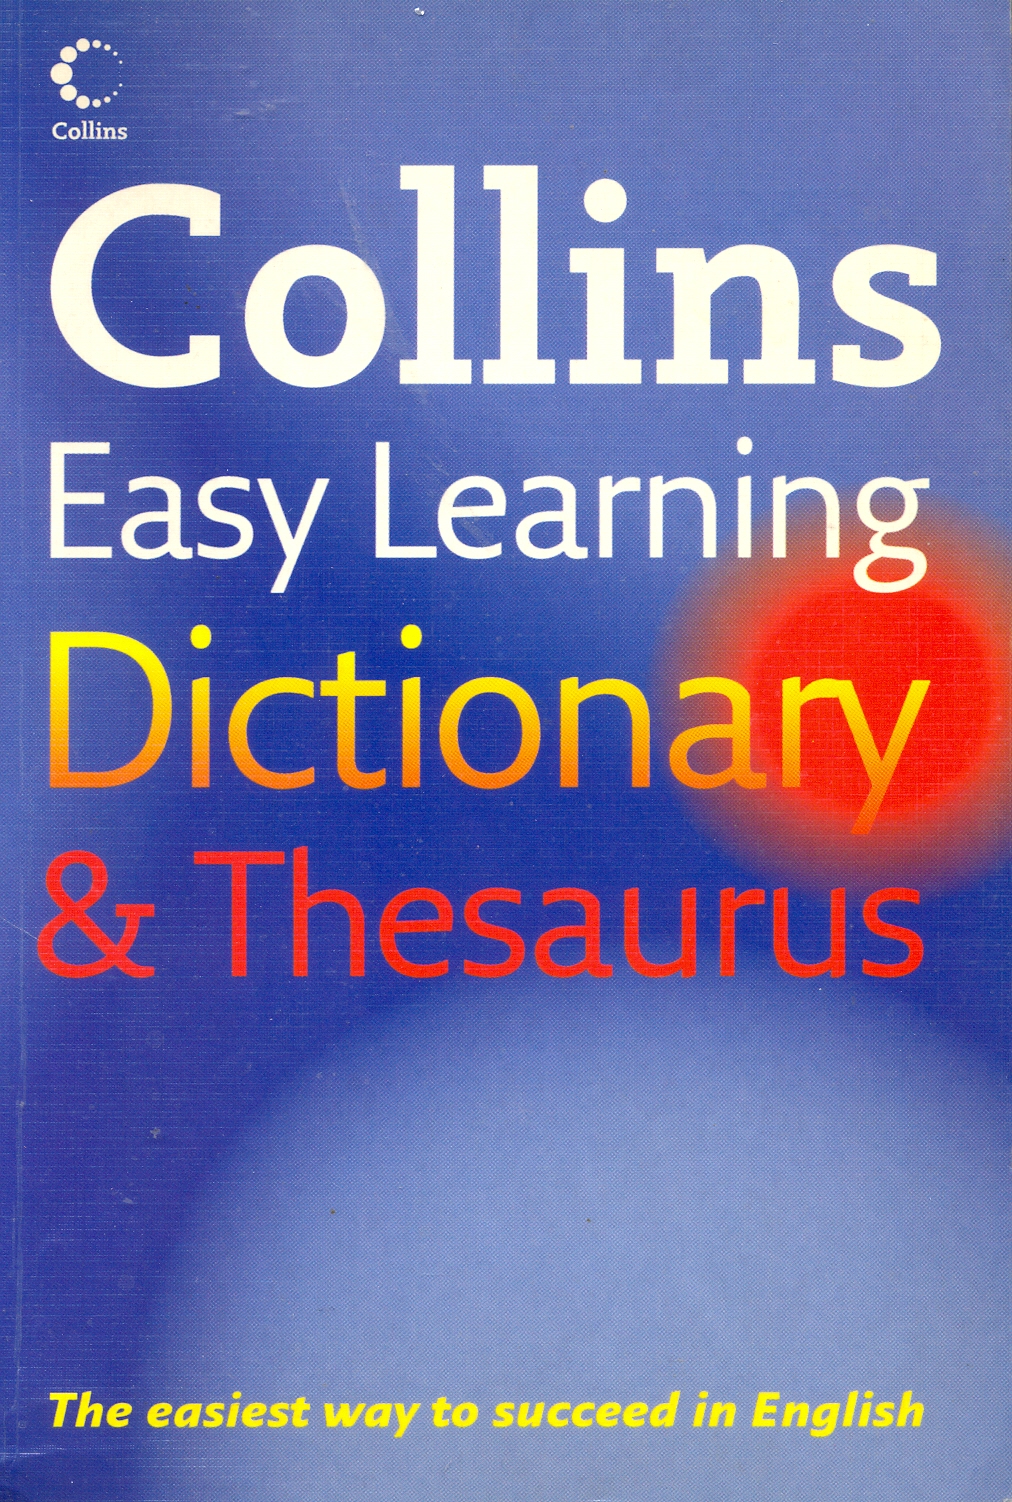 Collins concise school dictionary of the English language